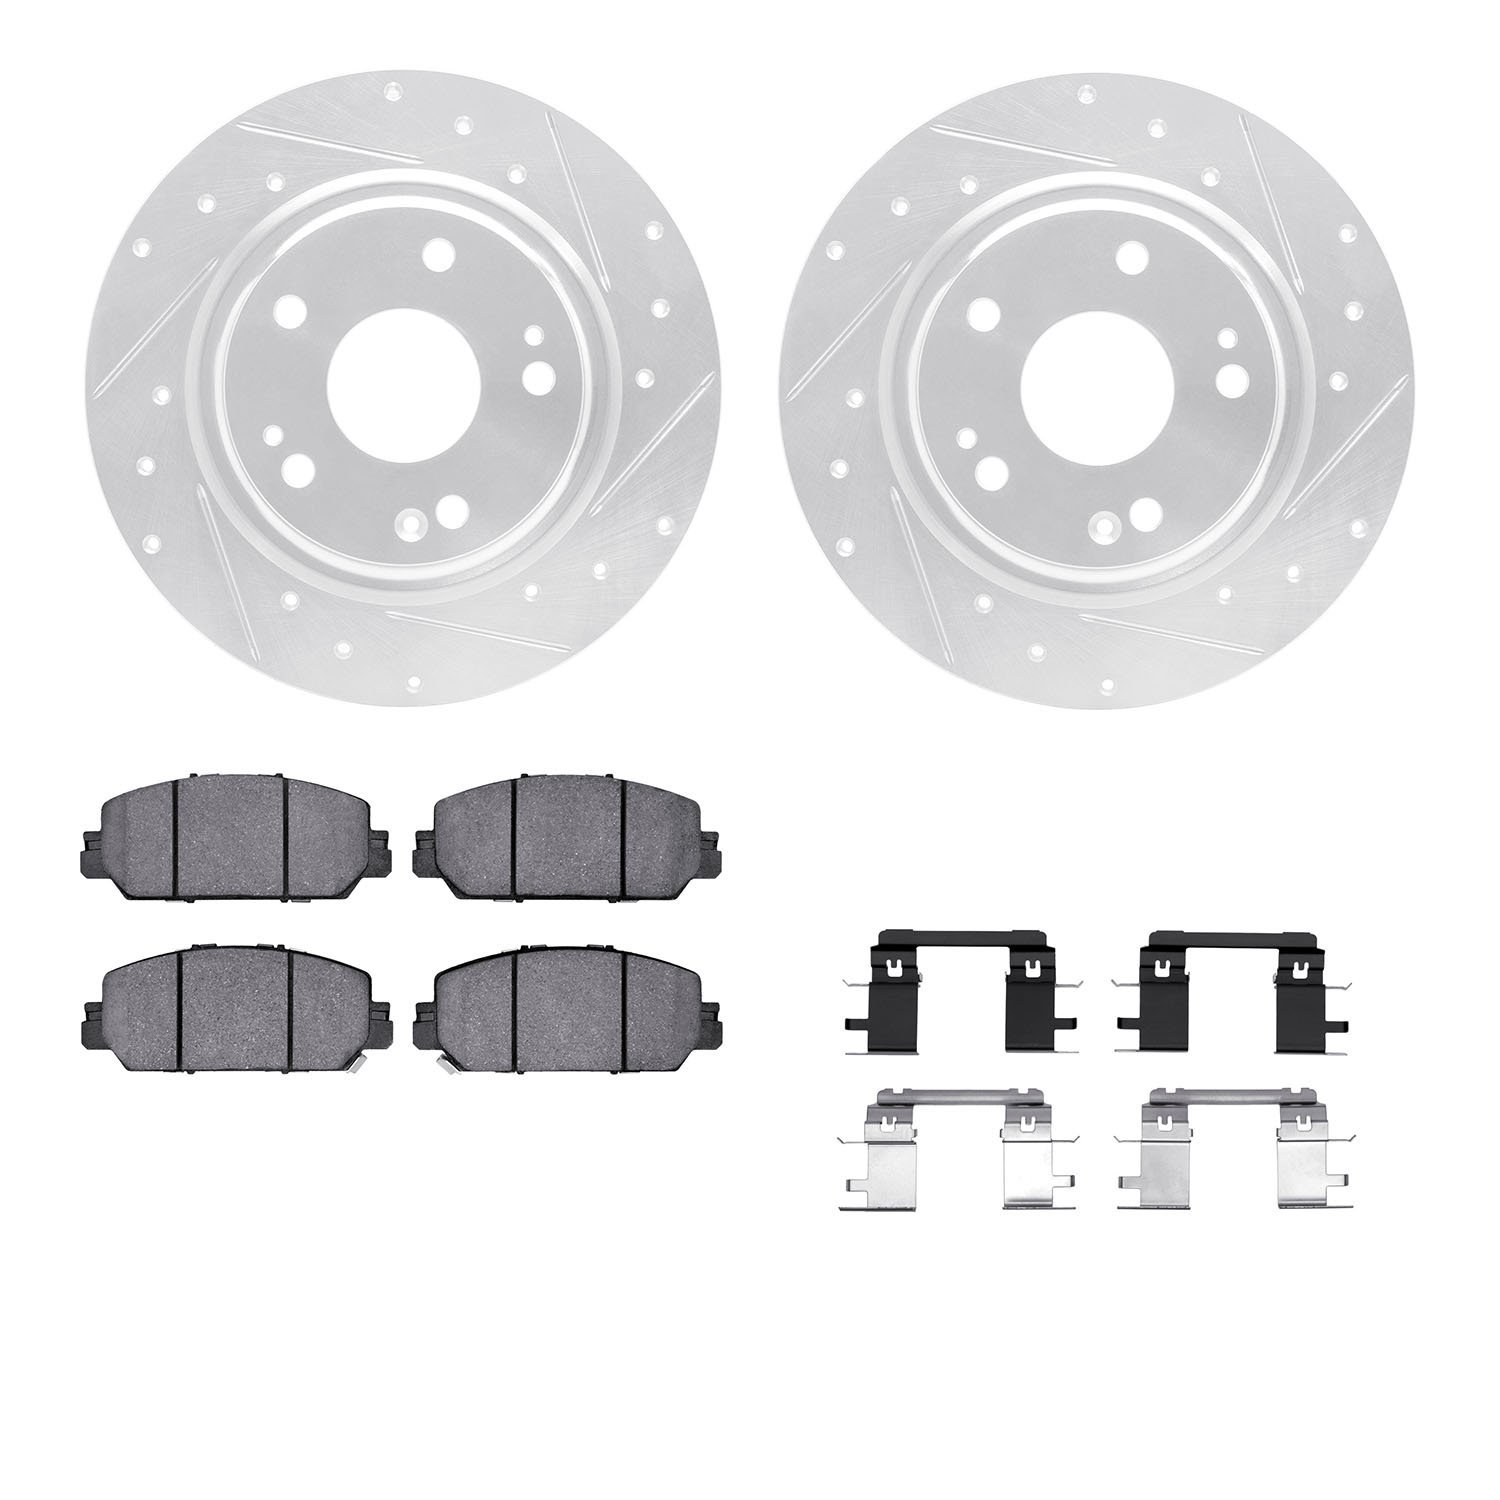 7312-59111 Drilled/Slotted Brake Rotor with 3000-Series Ceramic Brake Pads Kit & Hardware [Silver], Fits Select Acura/Honda, Pos